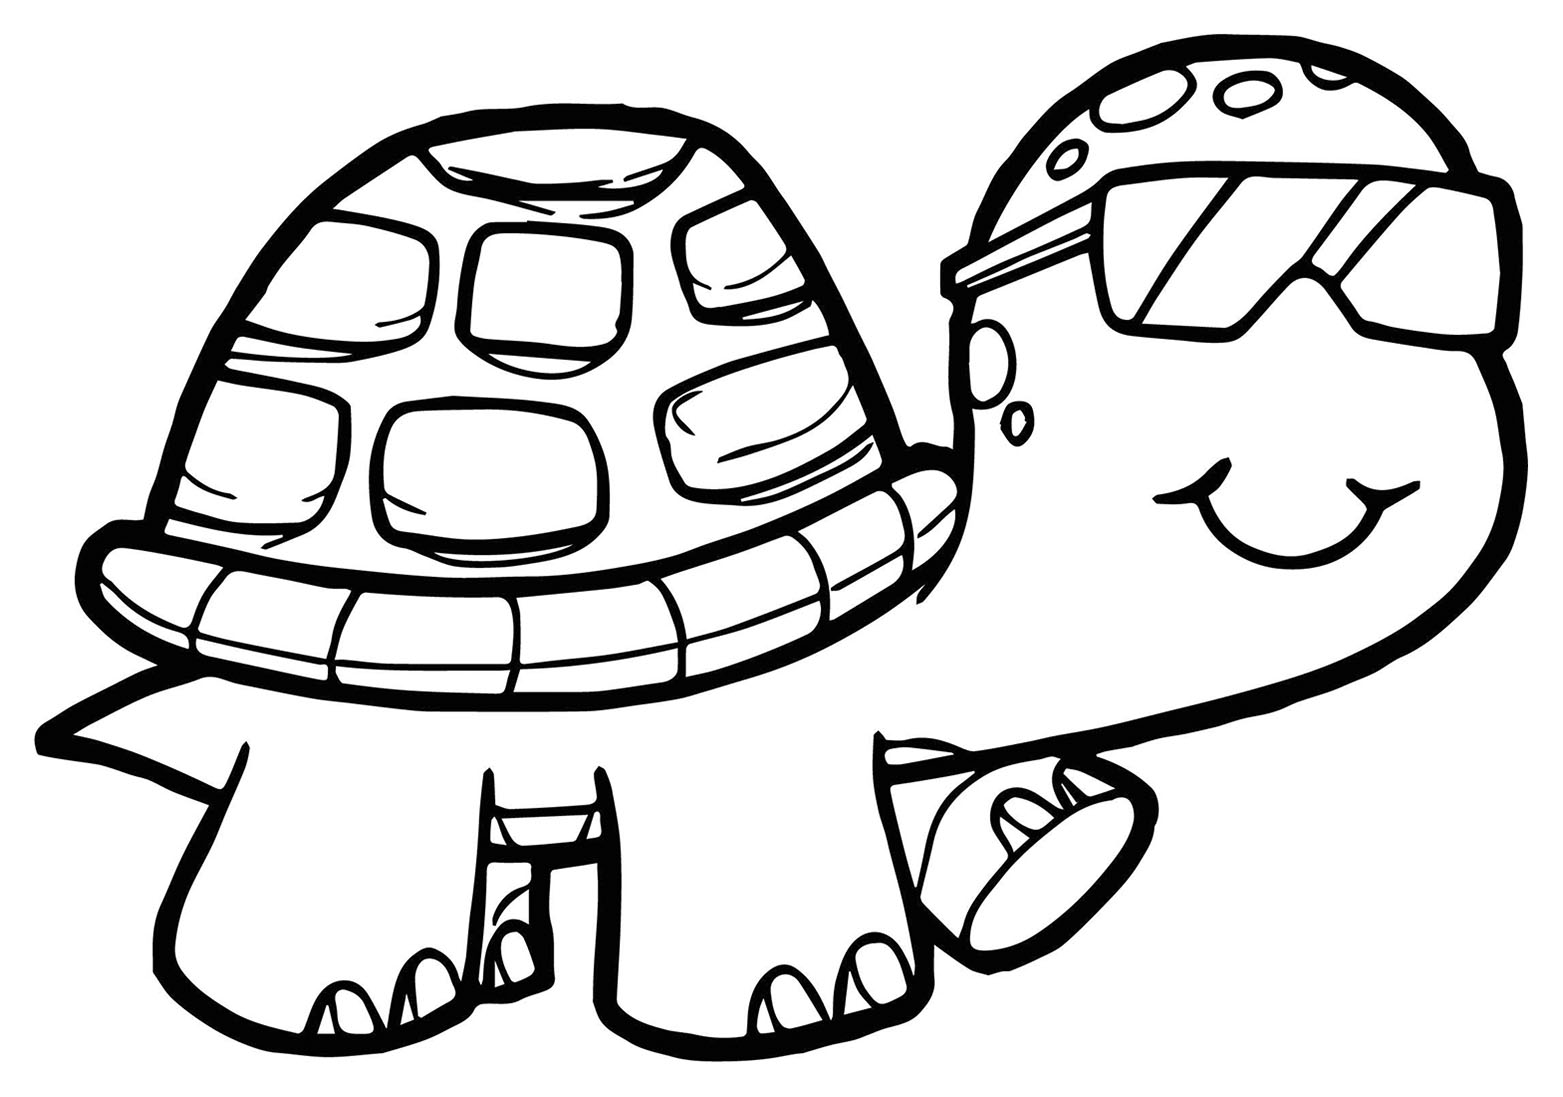 Download Turtles To Print For Free Turtles Kids Coloring Pages